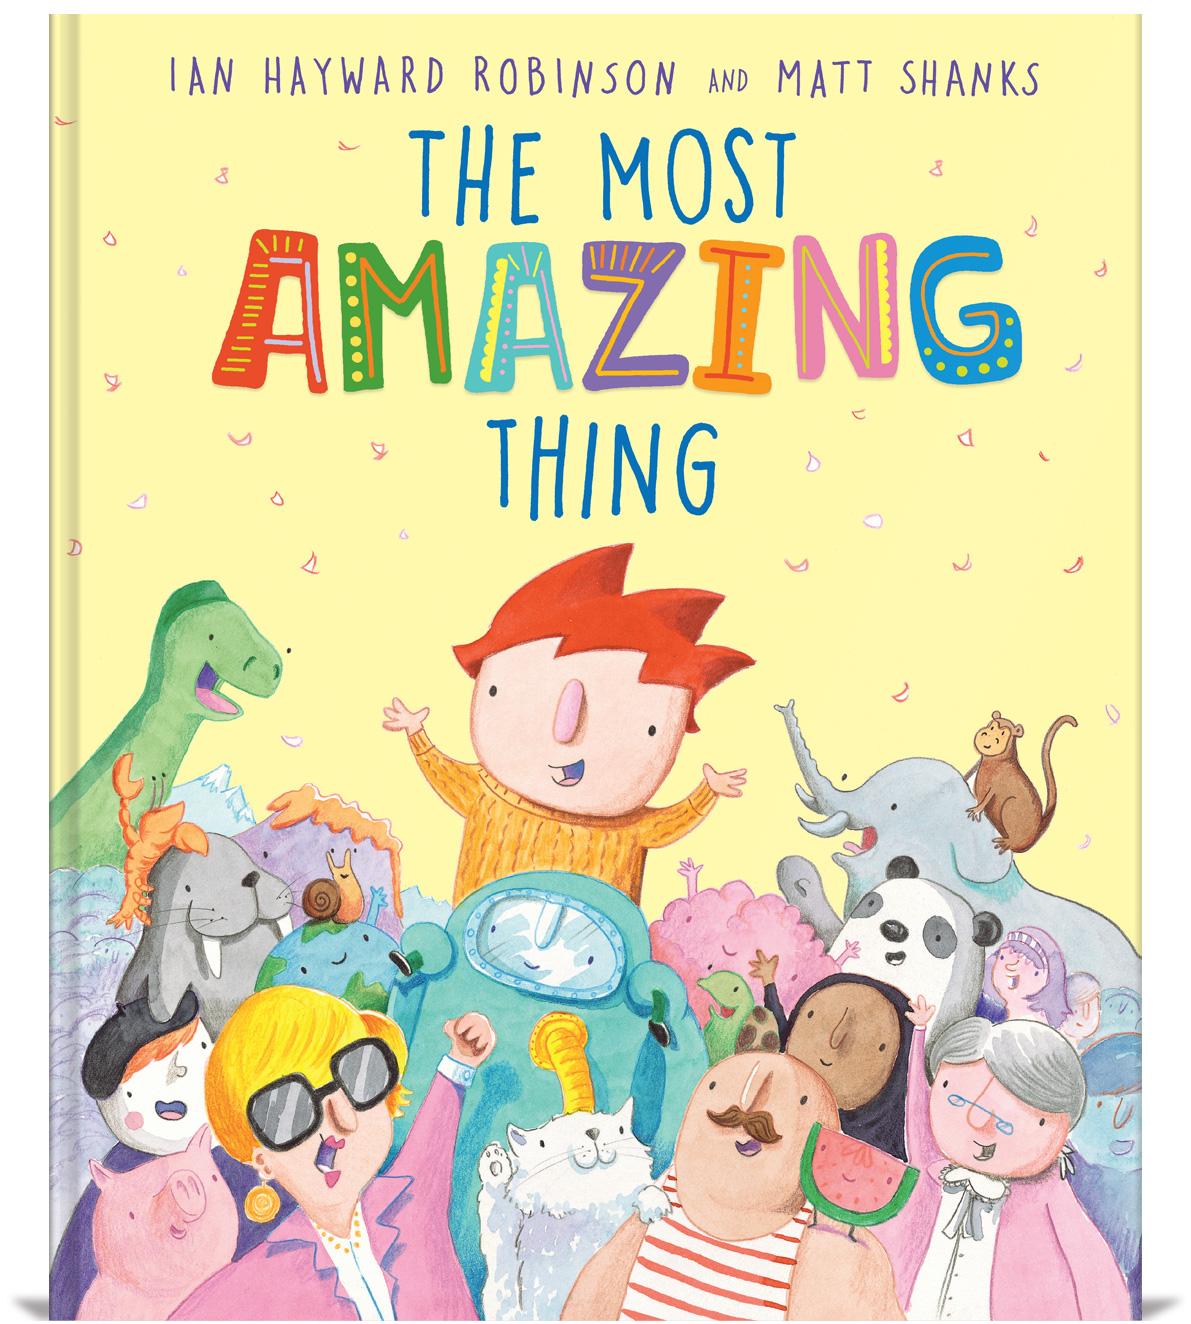 Picture Book cover, the most amazing thing, showing a small happy child surrounded by a diverse crowd in celebration